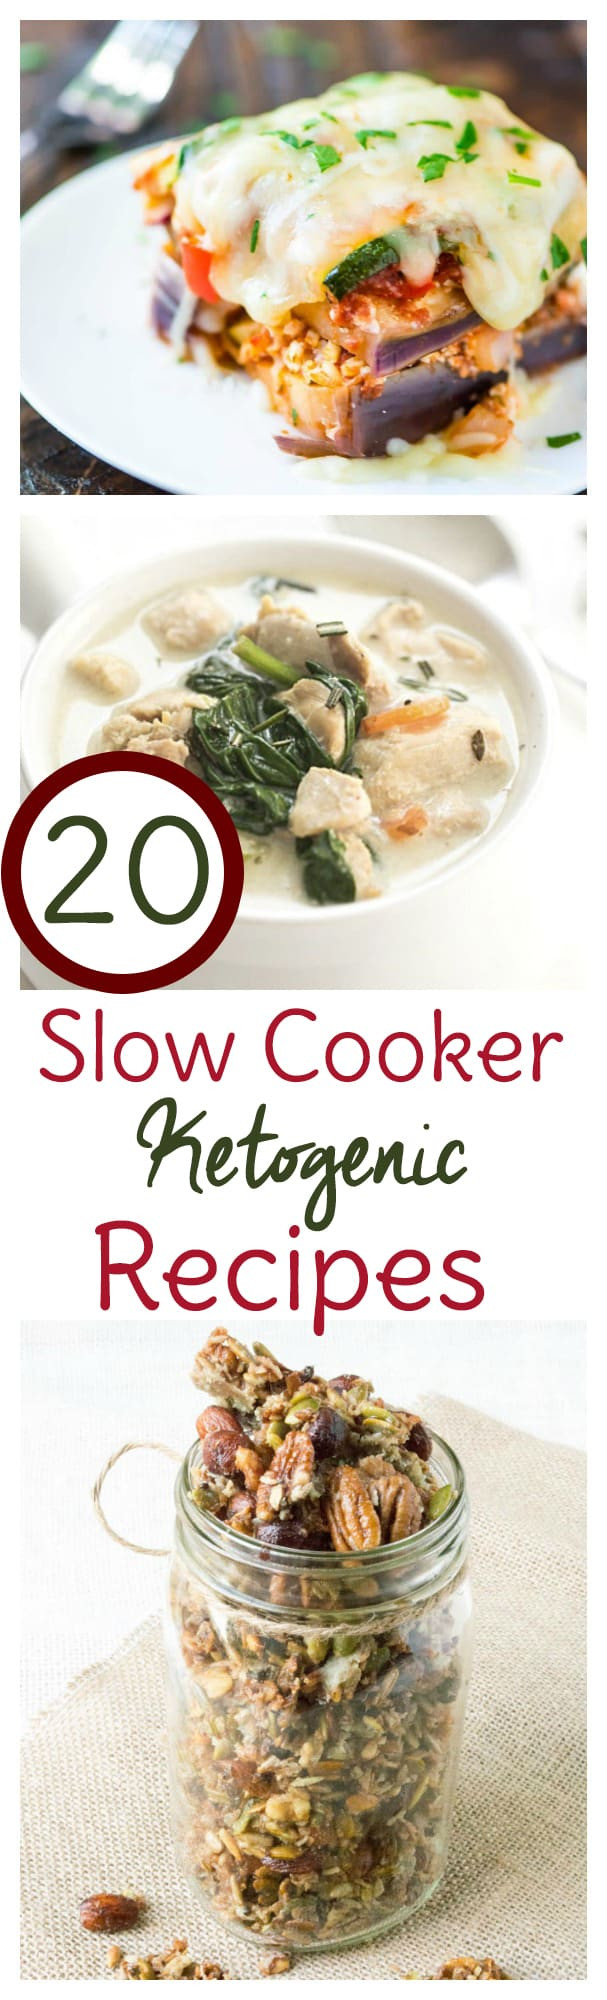 Keto Diet Recipes Slow Cooker
 Slow Cooker Keto Recipes Sweet T Makes Three